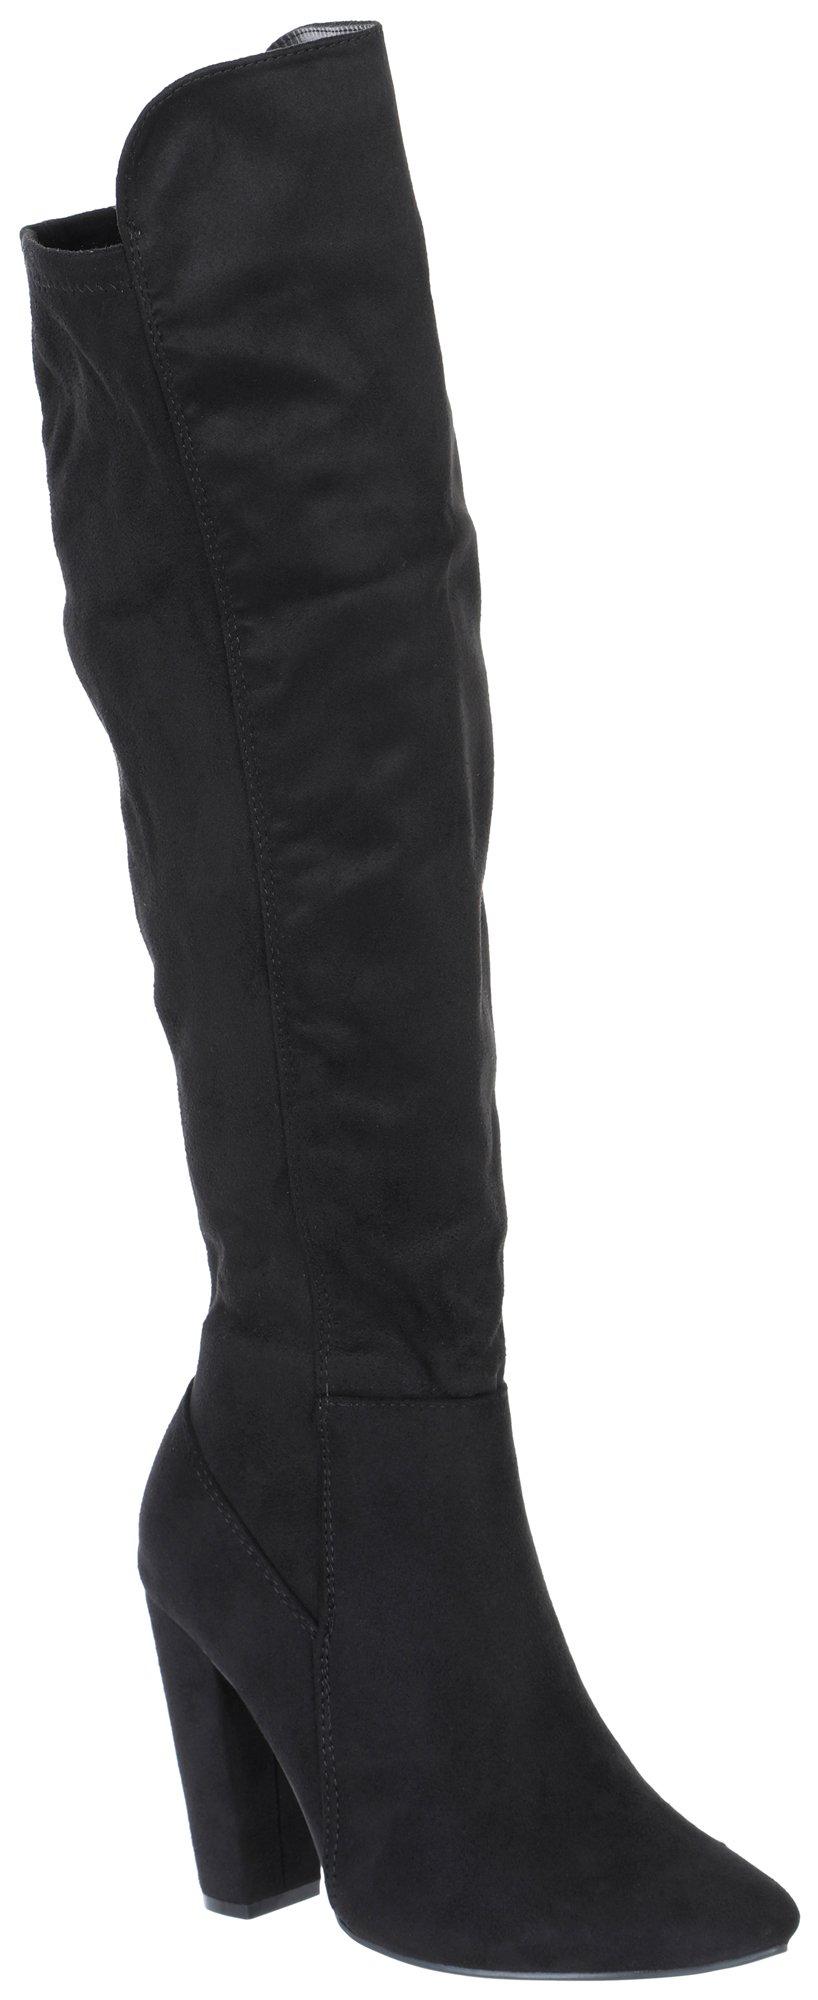 Women's Solid Tall Boots